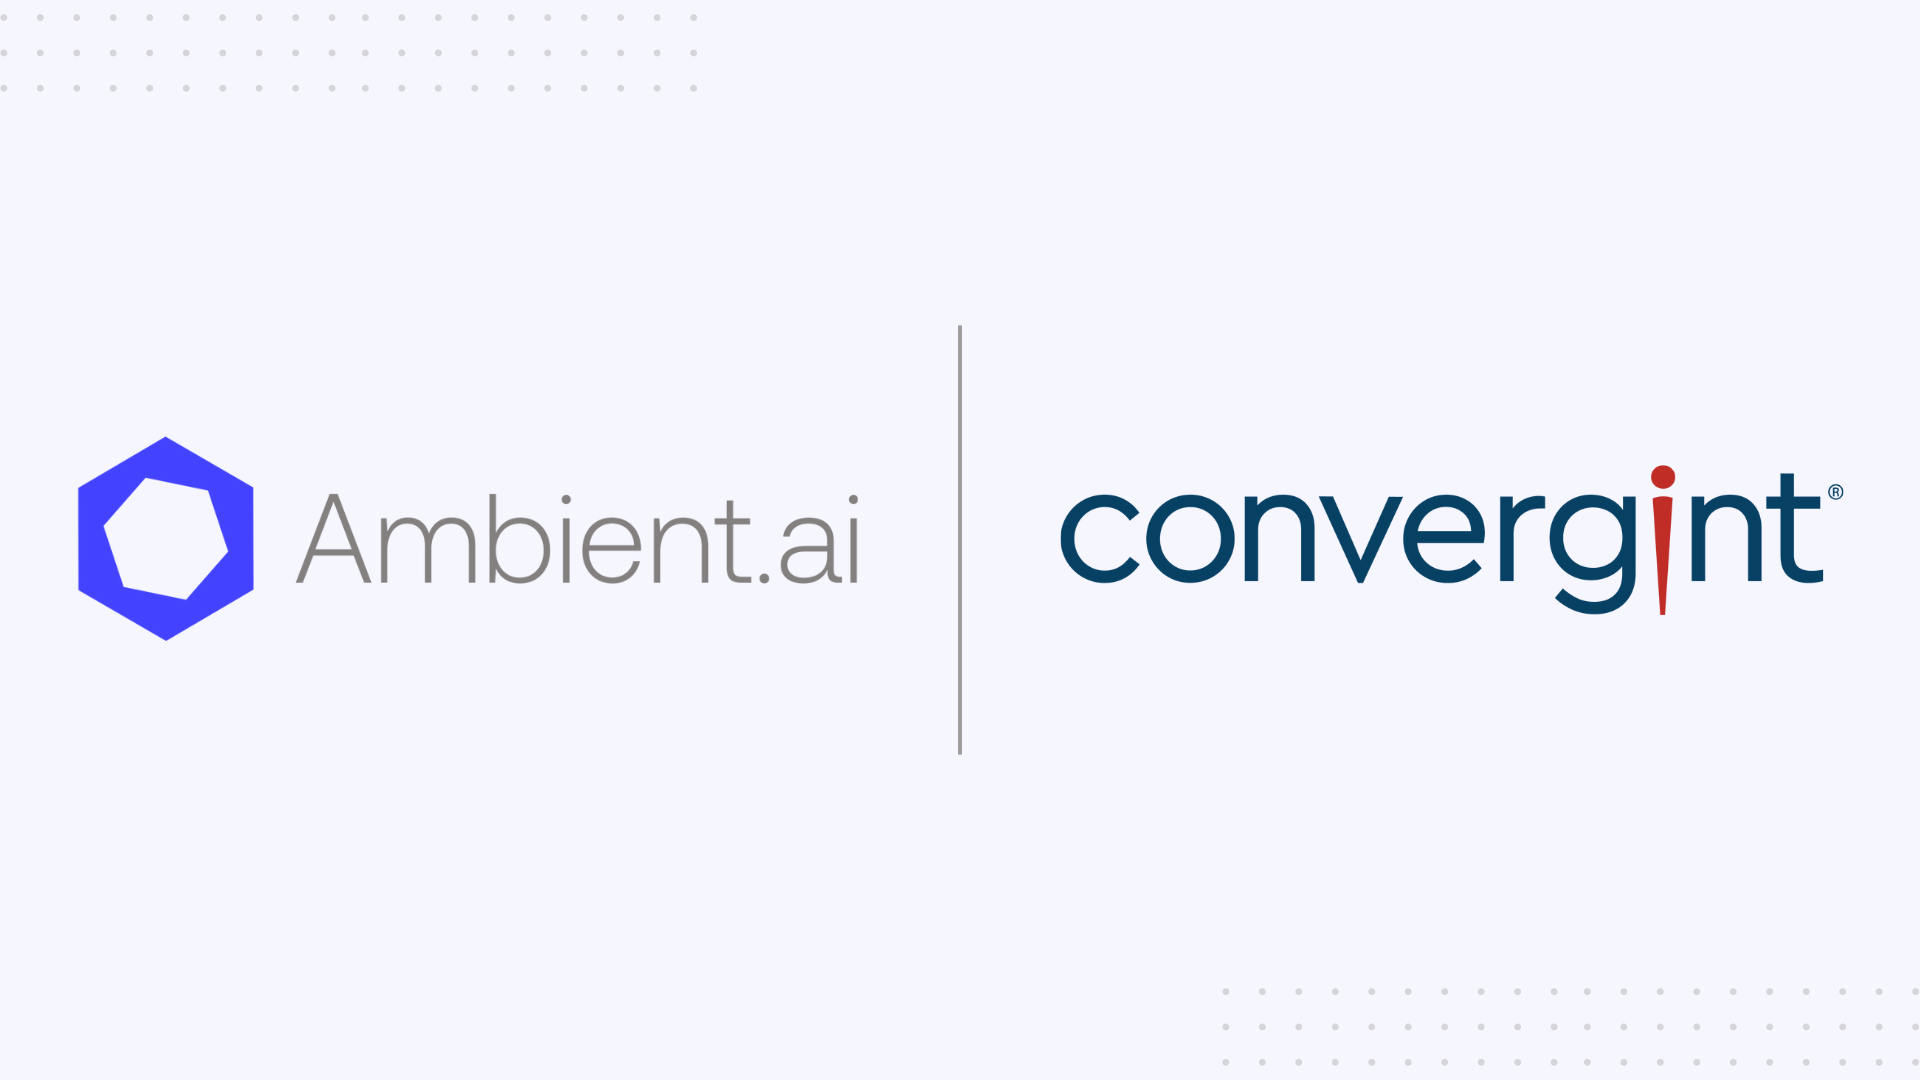 Ambient.ai and Convergint partnership